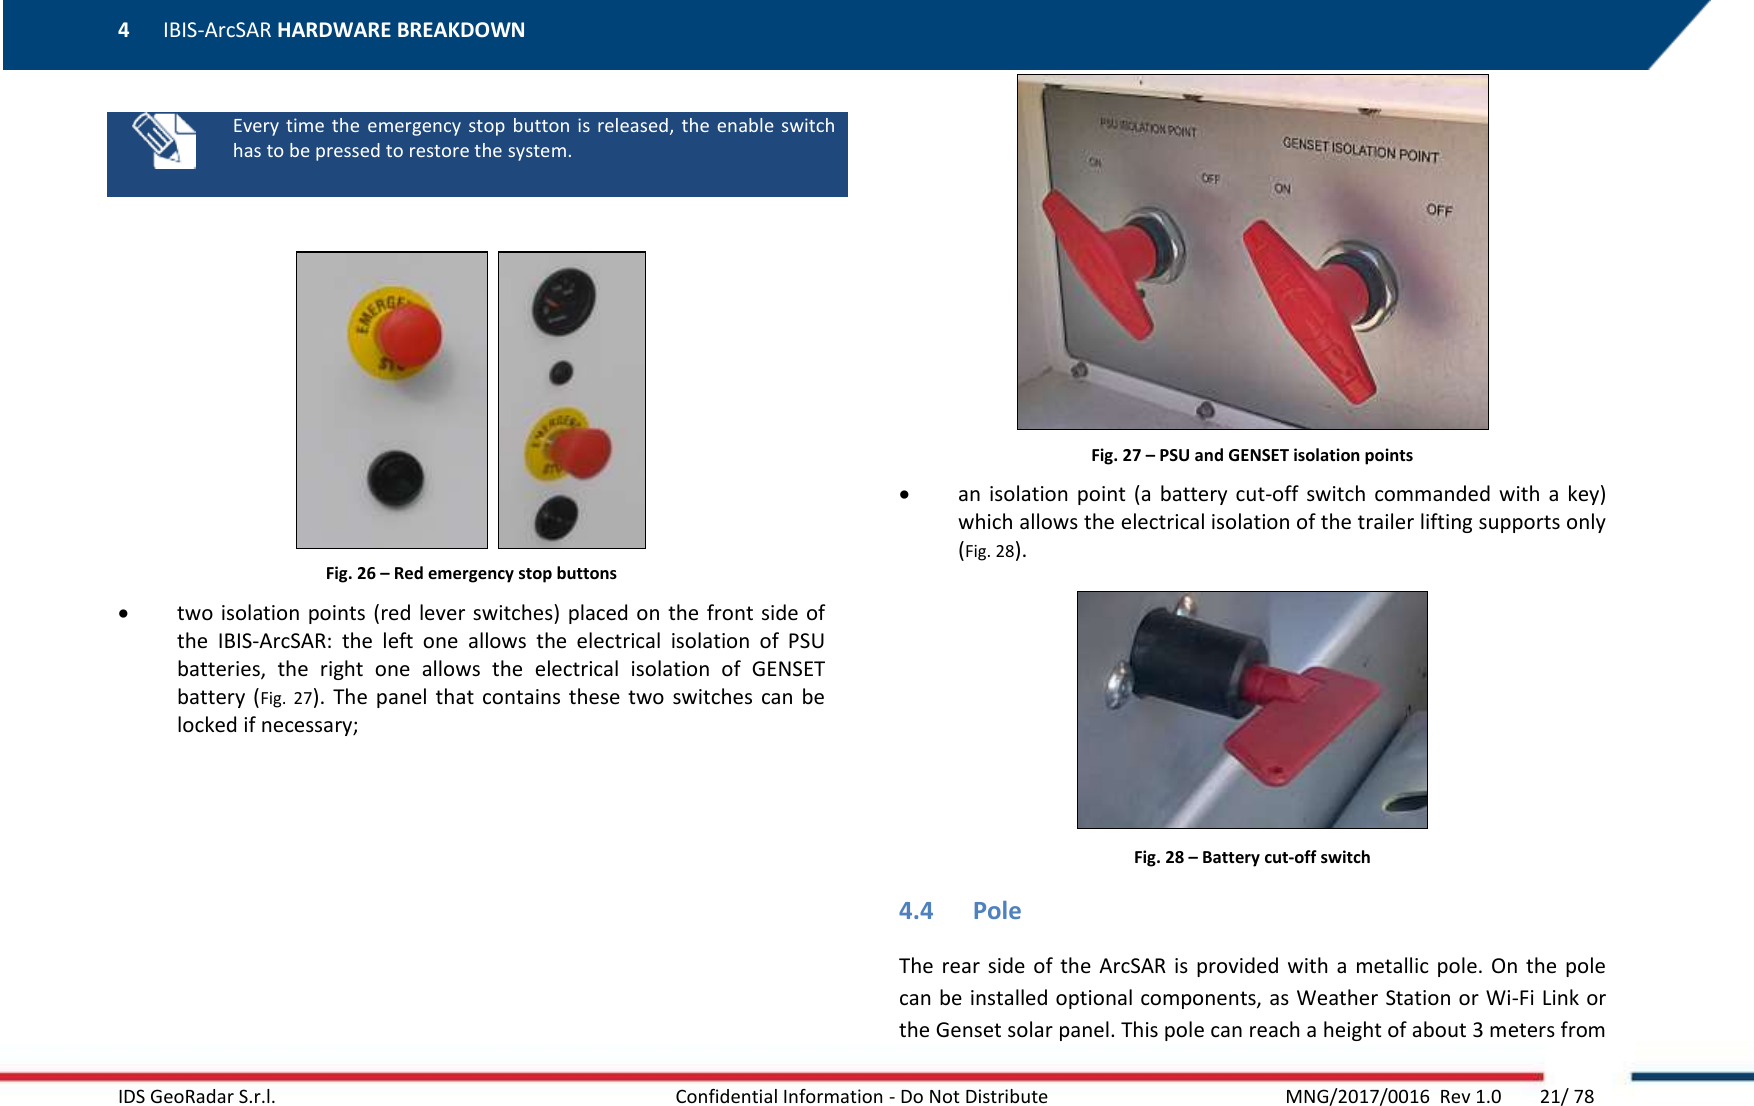 4 IBIS-ArcSAR HARDWARE BREAKDOWN    IDS GeoRadar S.r.l.  Confidential Information - Do Not Distribute     MNG/2017/0016  Rev 1.0        21/ 78    Every time  the  emergency  stop button  is  released,  the enable  switch has to be pressed to restore the system.     Fig. 26 – Red emergency stop buttons  two isolation points (red lever switches) placed on  the front side of the  IBIS-ArcSAR:  the  left  one  allows  the  electrical  isolation  of  PSU batteries,  the  right  one  allows  the  electrical  isolation  of  GENSET battery  (Fig.  27).  The  panel  that  contains  these  two  switches  can be locked if necessary;  Fig. 27 – PSU and GENSET isolation points  an  isolation  point (a  battery  cut-off  switch commanded with  a key) which allows the electrical isolation of the trailer lifting supports only (Fig. 28).  Fig. 28 – Battery cut-off switch 4.4 Pole The rear  side  of the  ArcSAR  is provided  with  a metallic pole. On  the  pole can be installed optional components, as Weather Station or Wi-Fi Link or the Genset solar panel. This pole can reach a height of about 3 meters from 